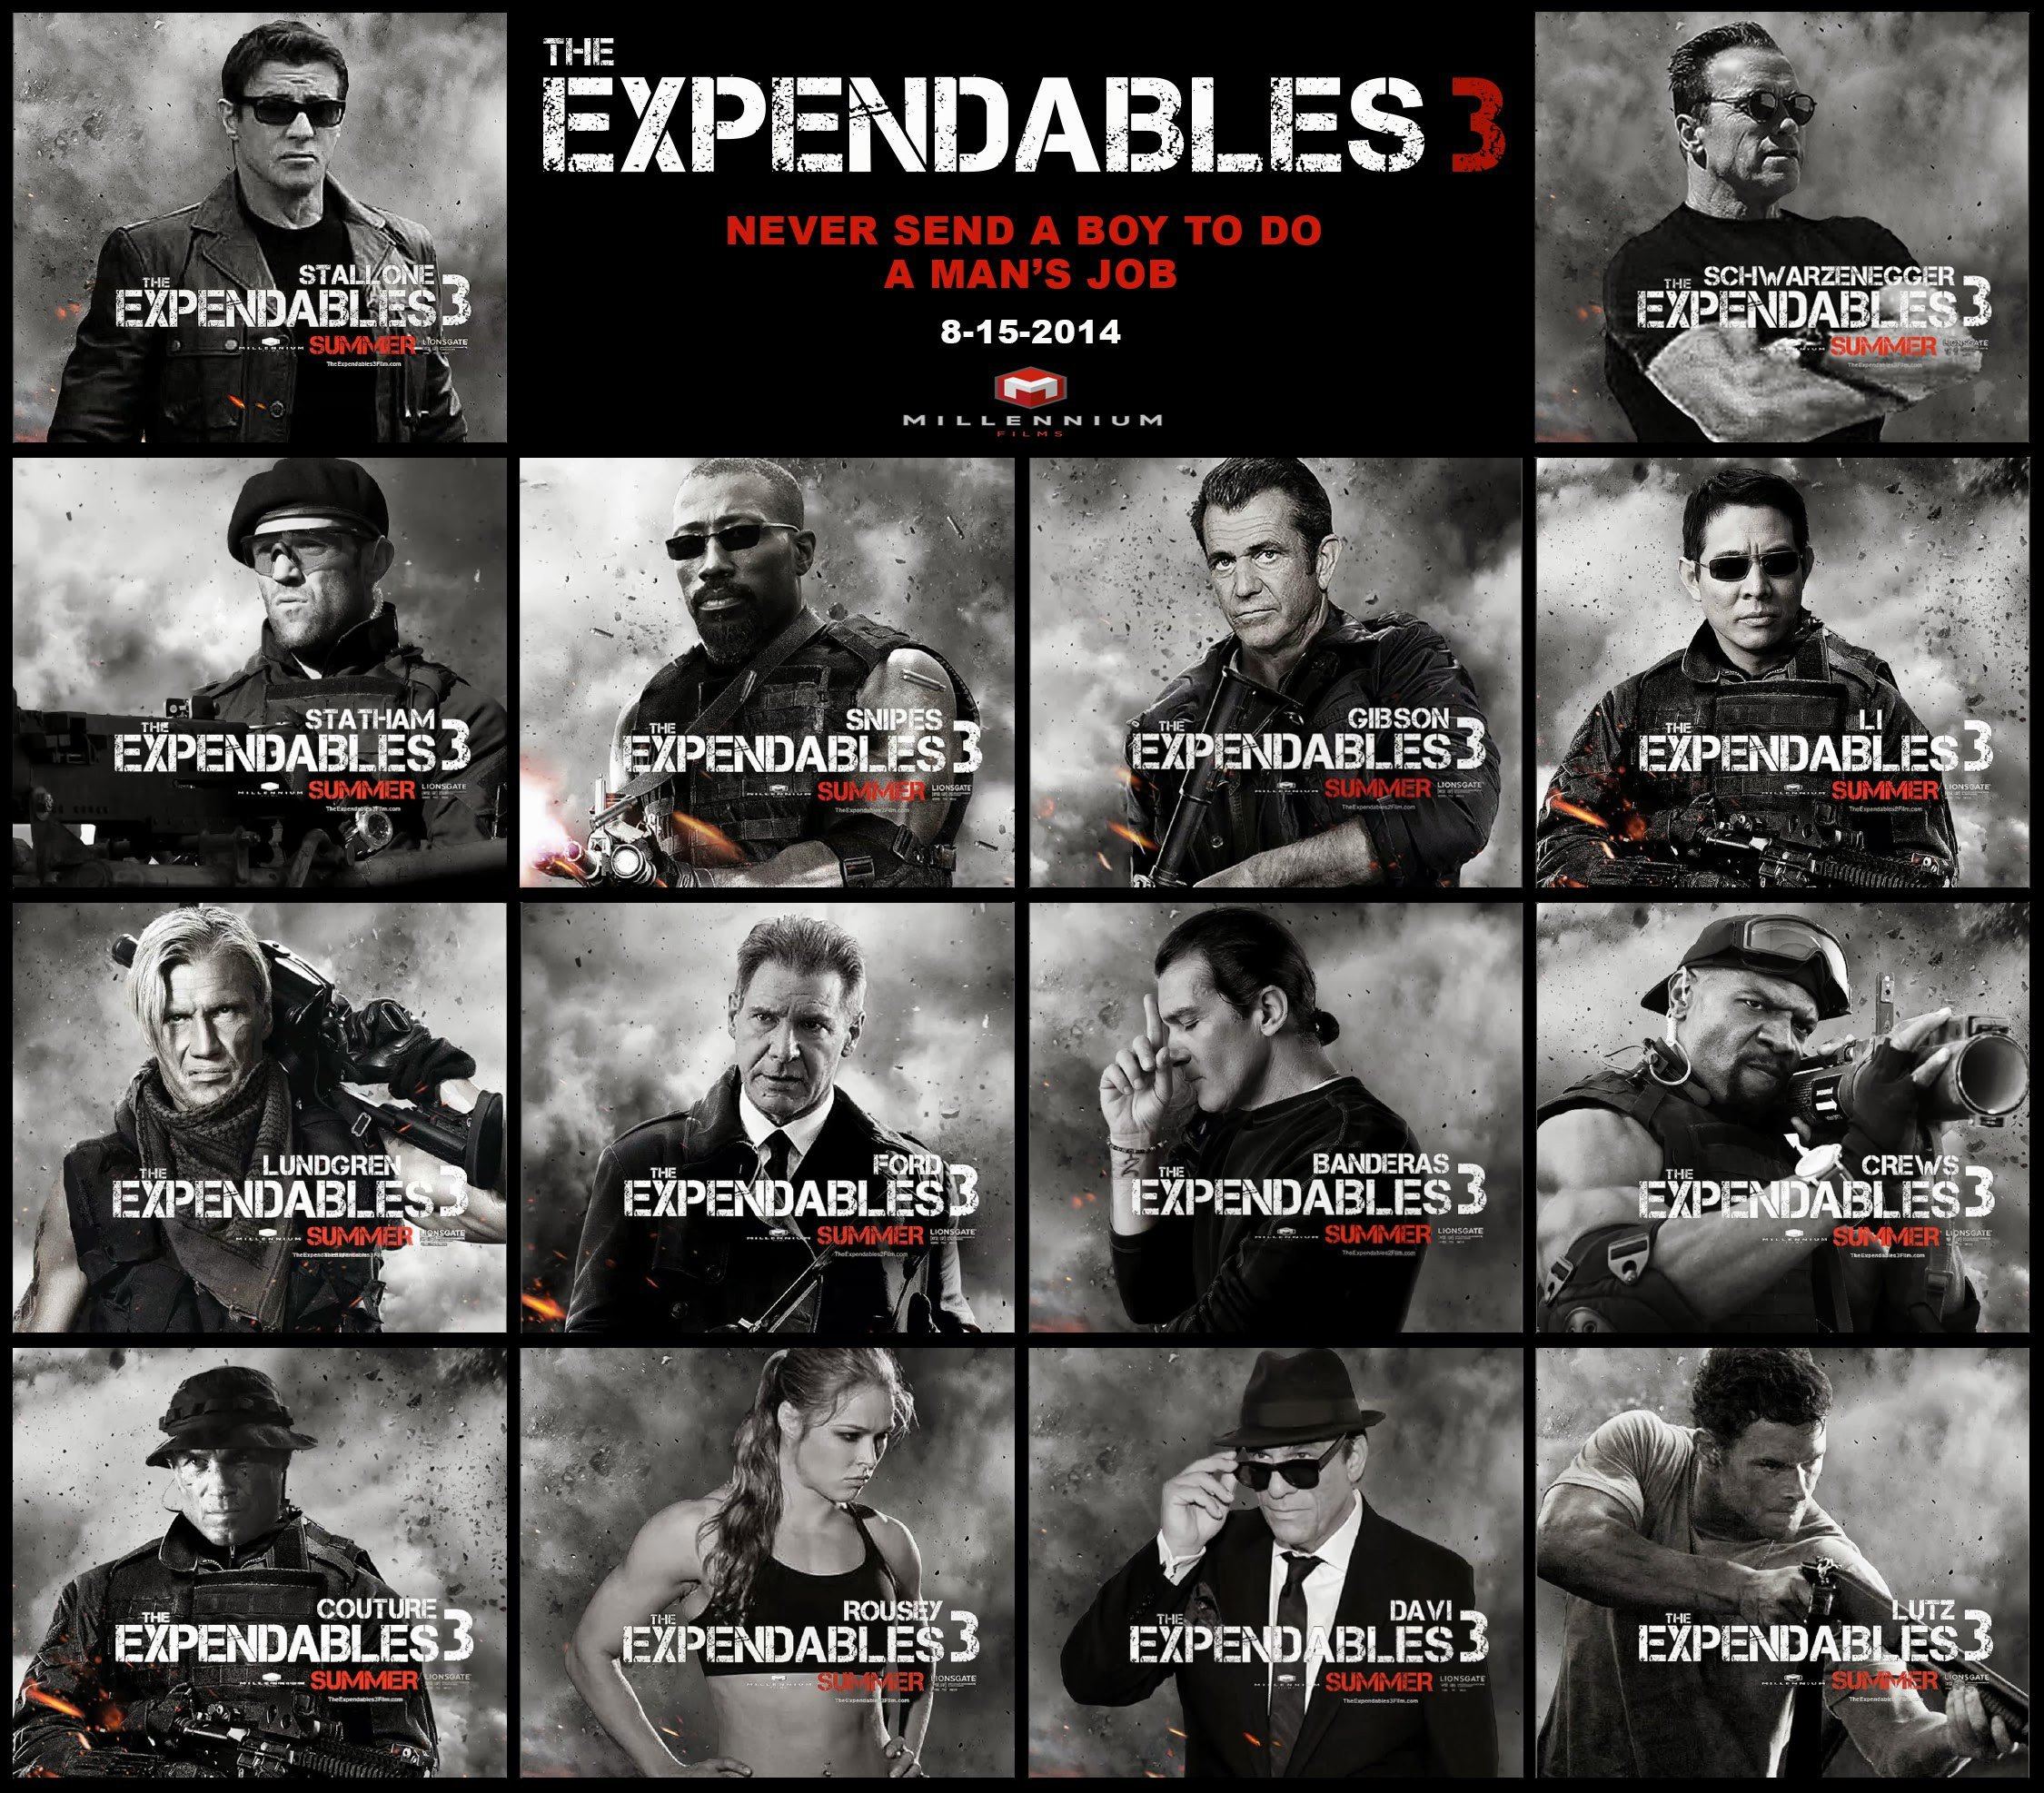 poster_theexpendables3_01n.jpg